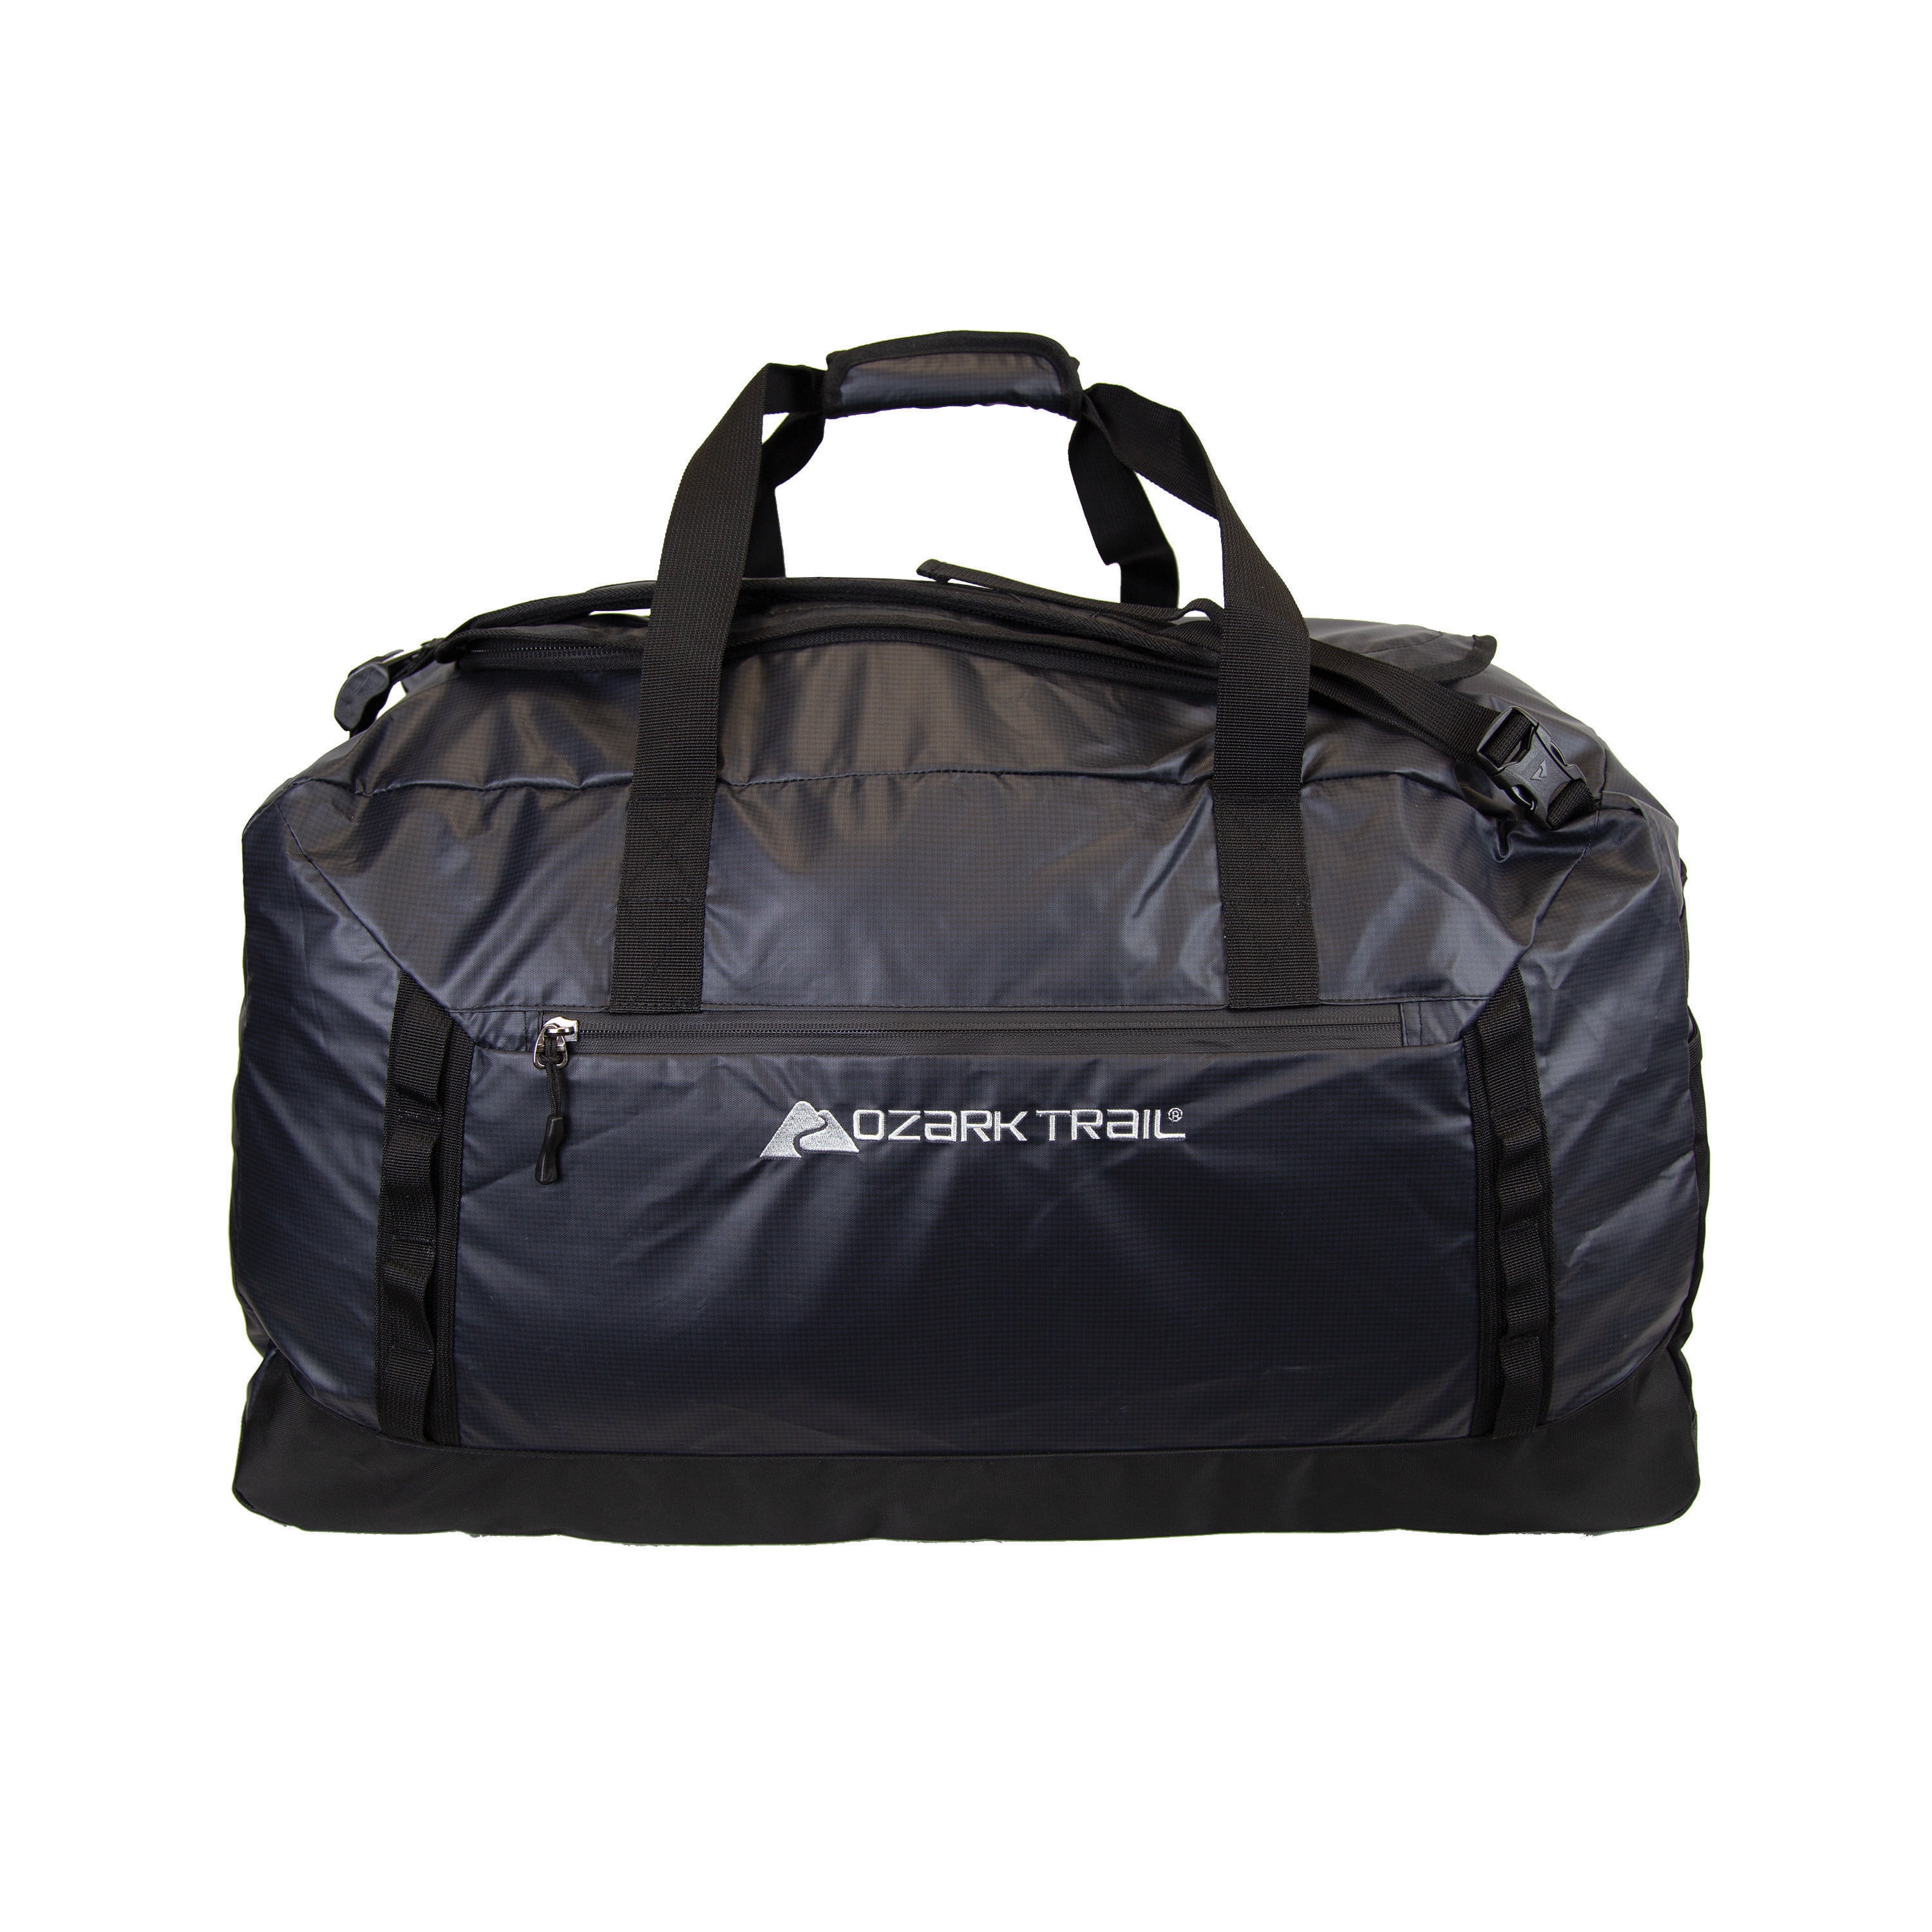 Ozark Trail 90L Packable All-Weather Duffel Bag with Convertible Backpack Straps, Black